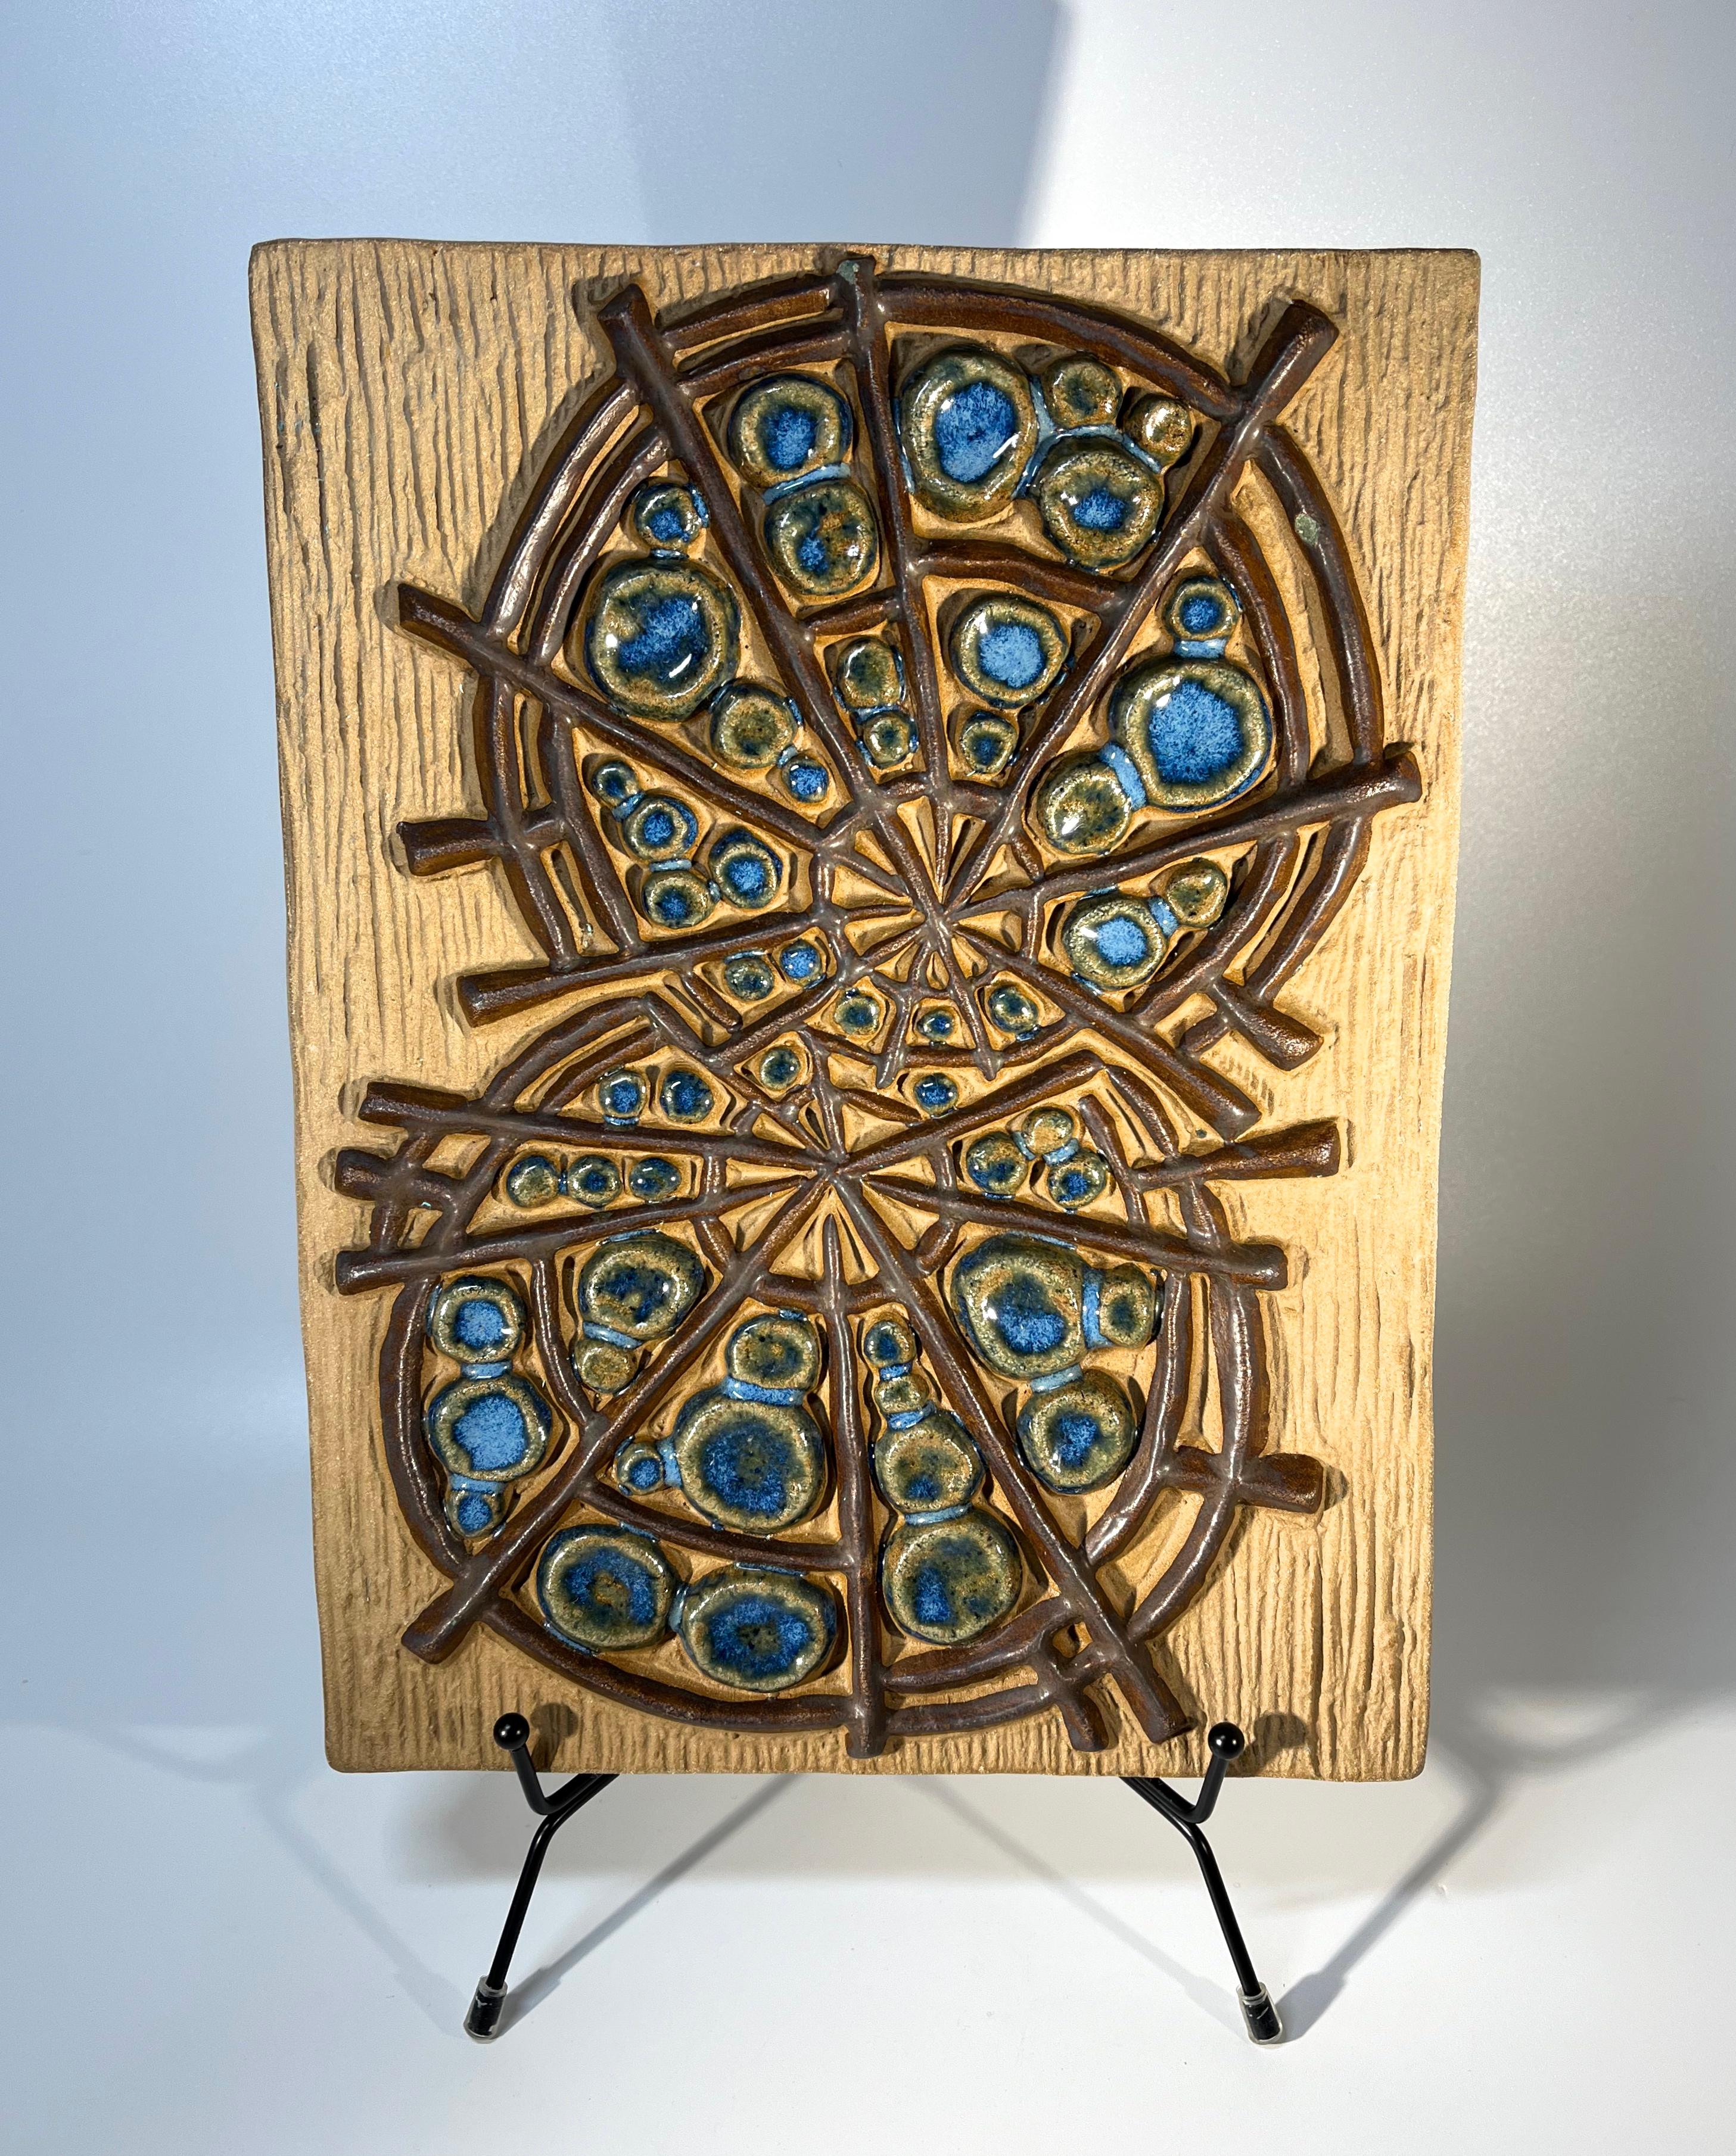 20th Century Abstract Wheels By Marianne Starck For Michael Andersen. Danish Wall Plaque For Sale